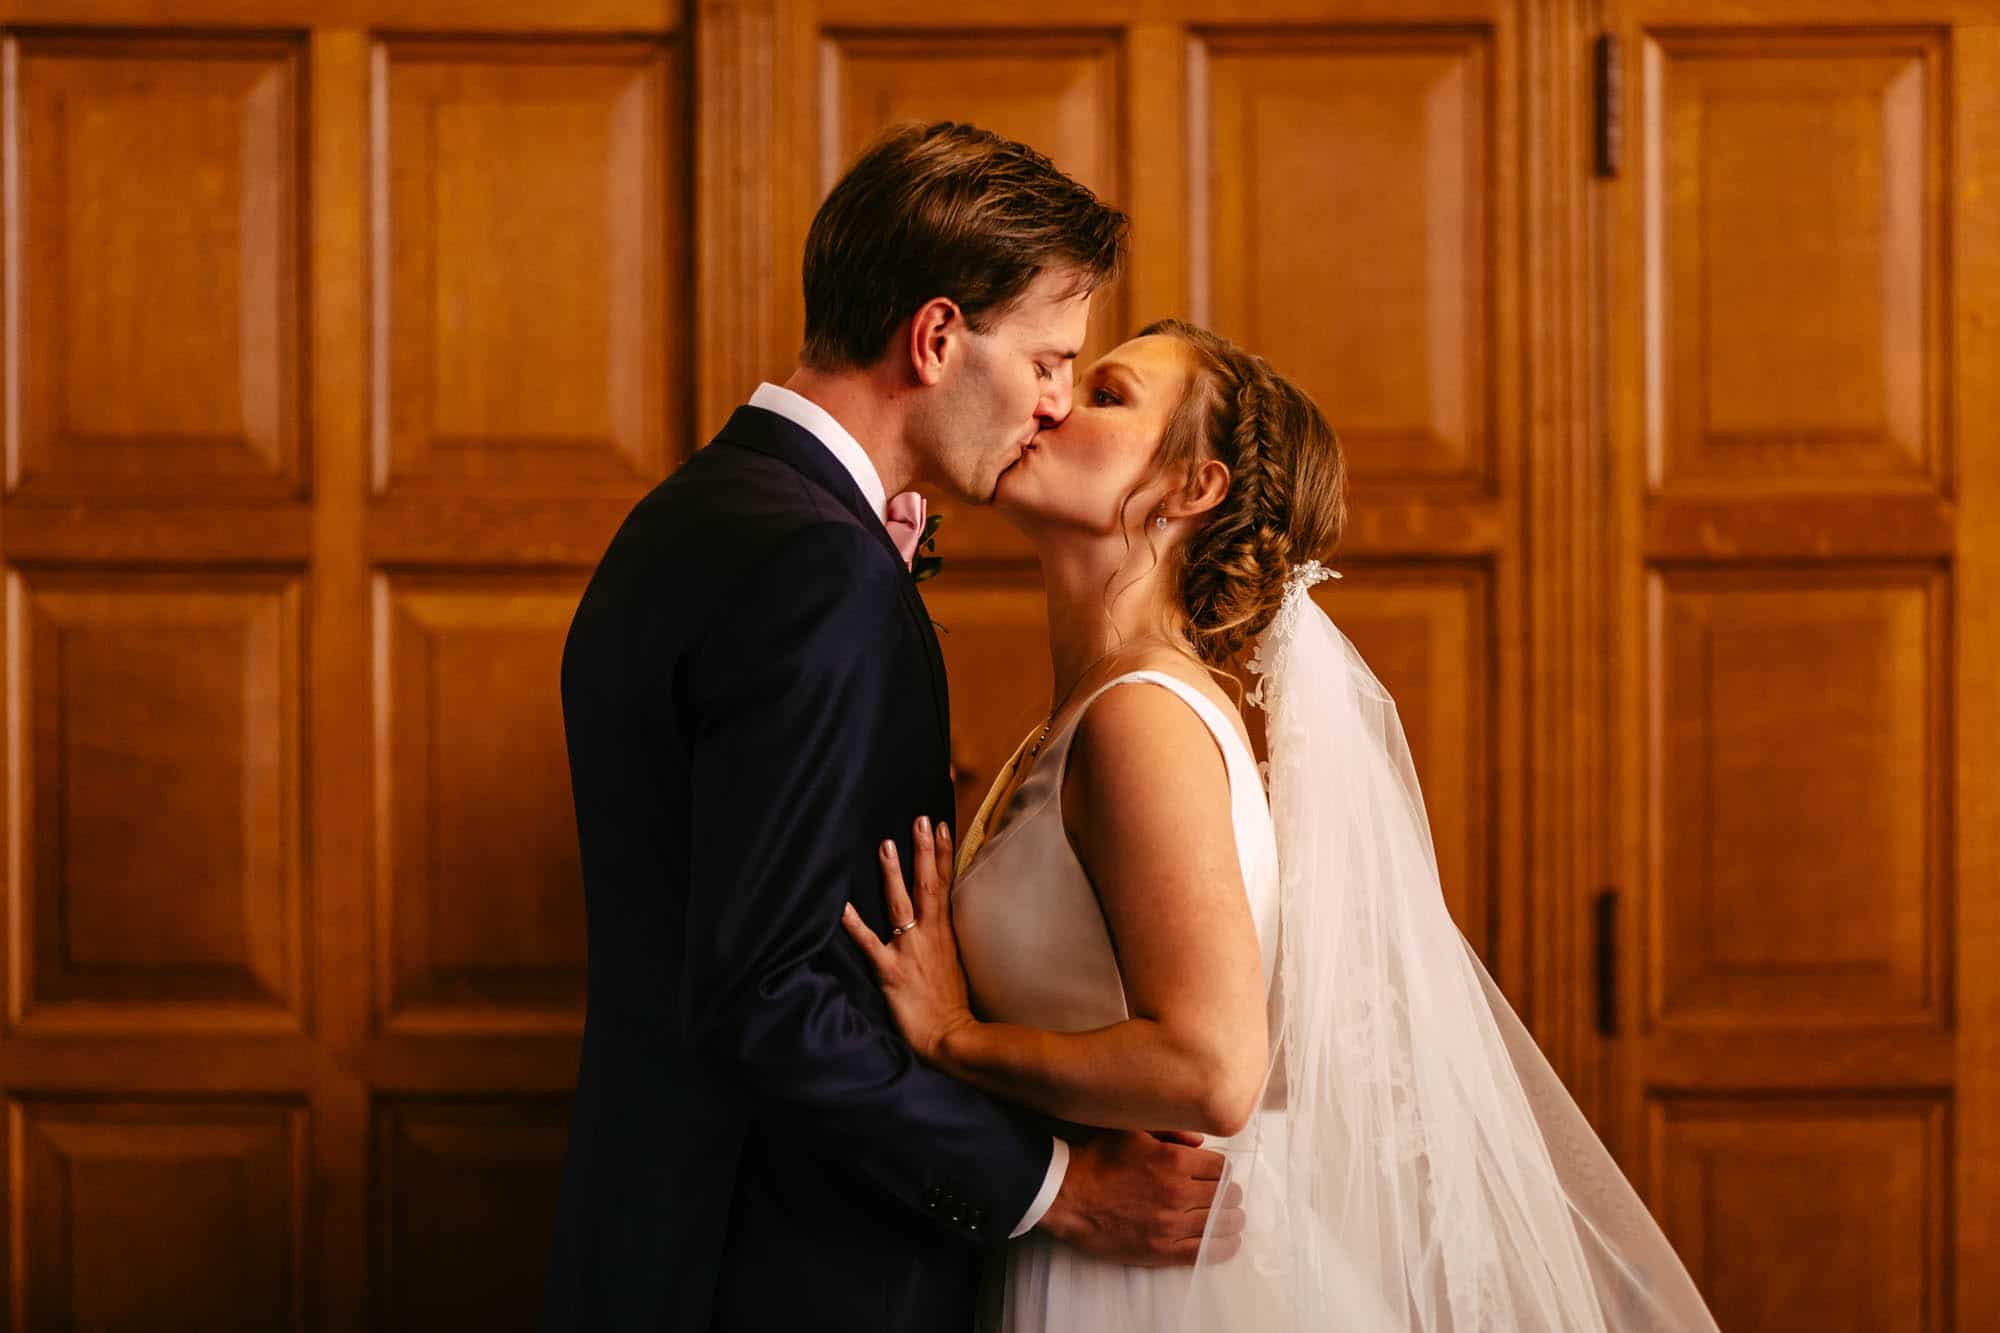 A bride and groom kiss in front of wooden doors.